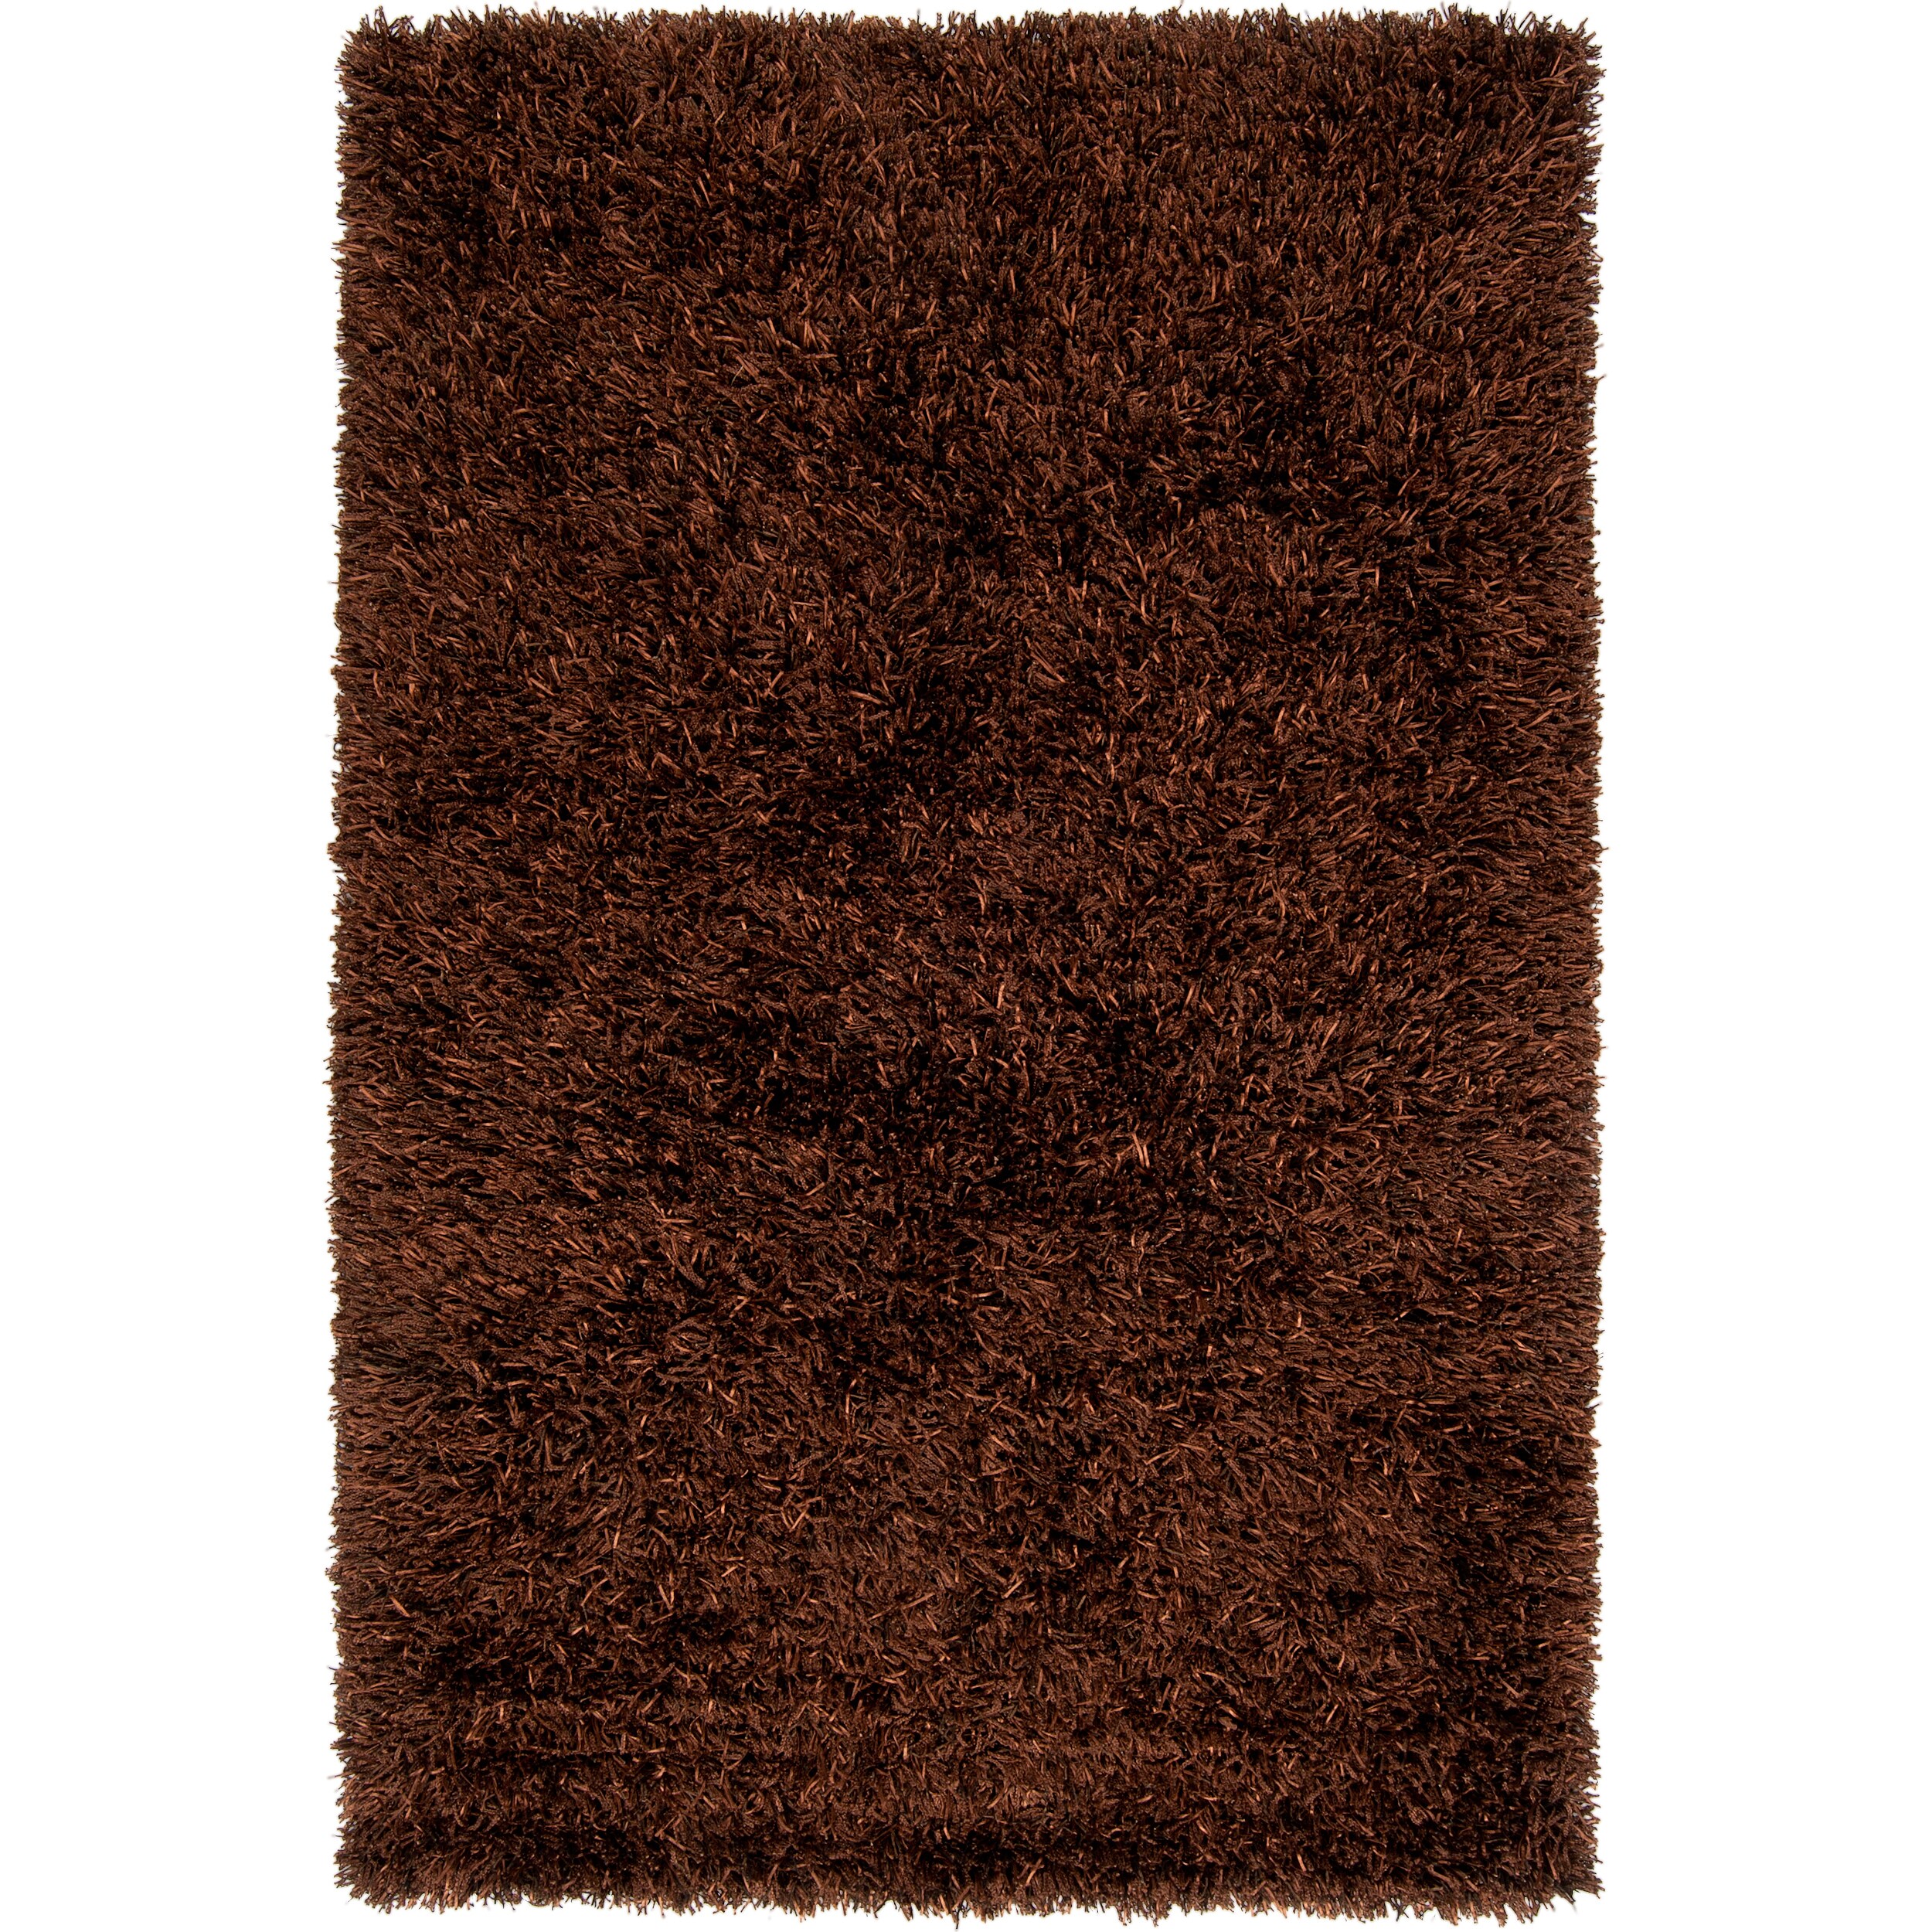 Hand woven Brown Woodford Ultra Plush Polyester Shag Rug (8 X 10)